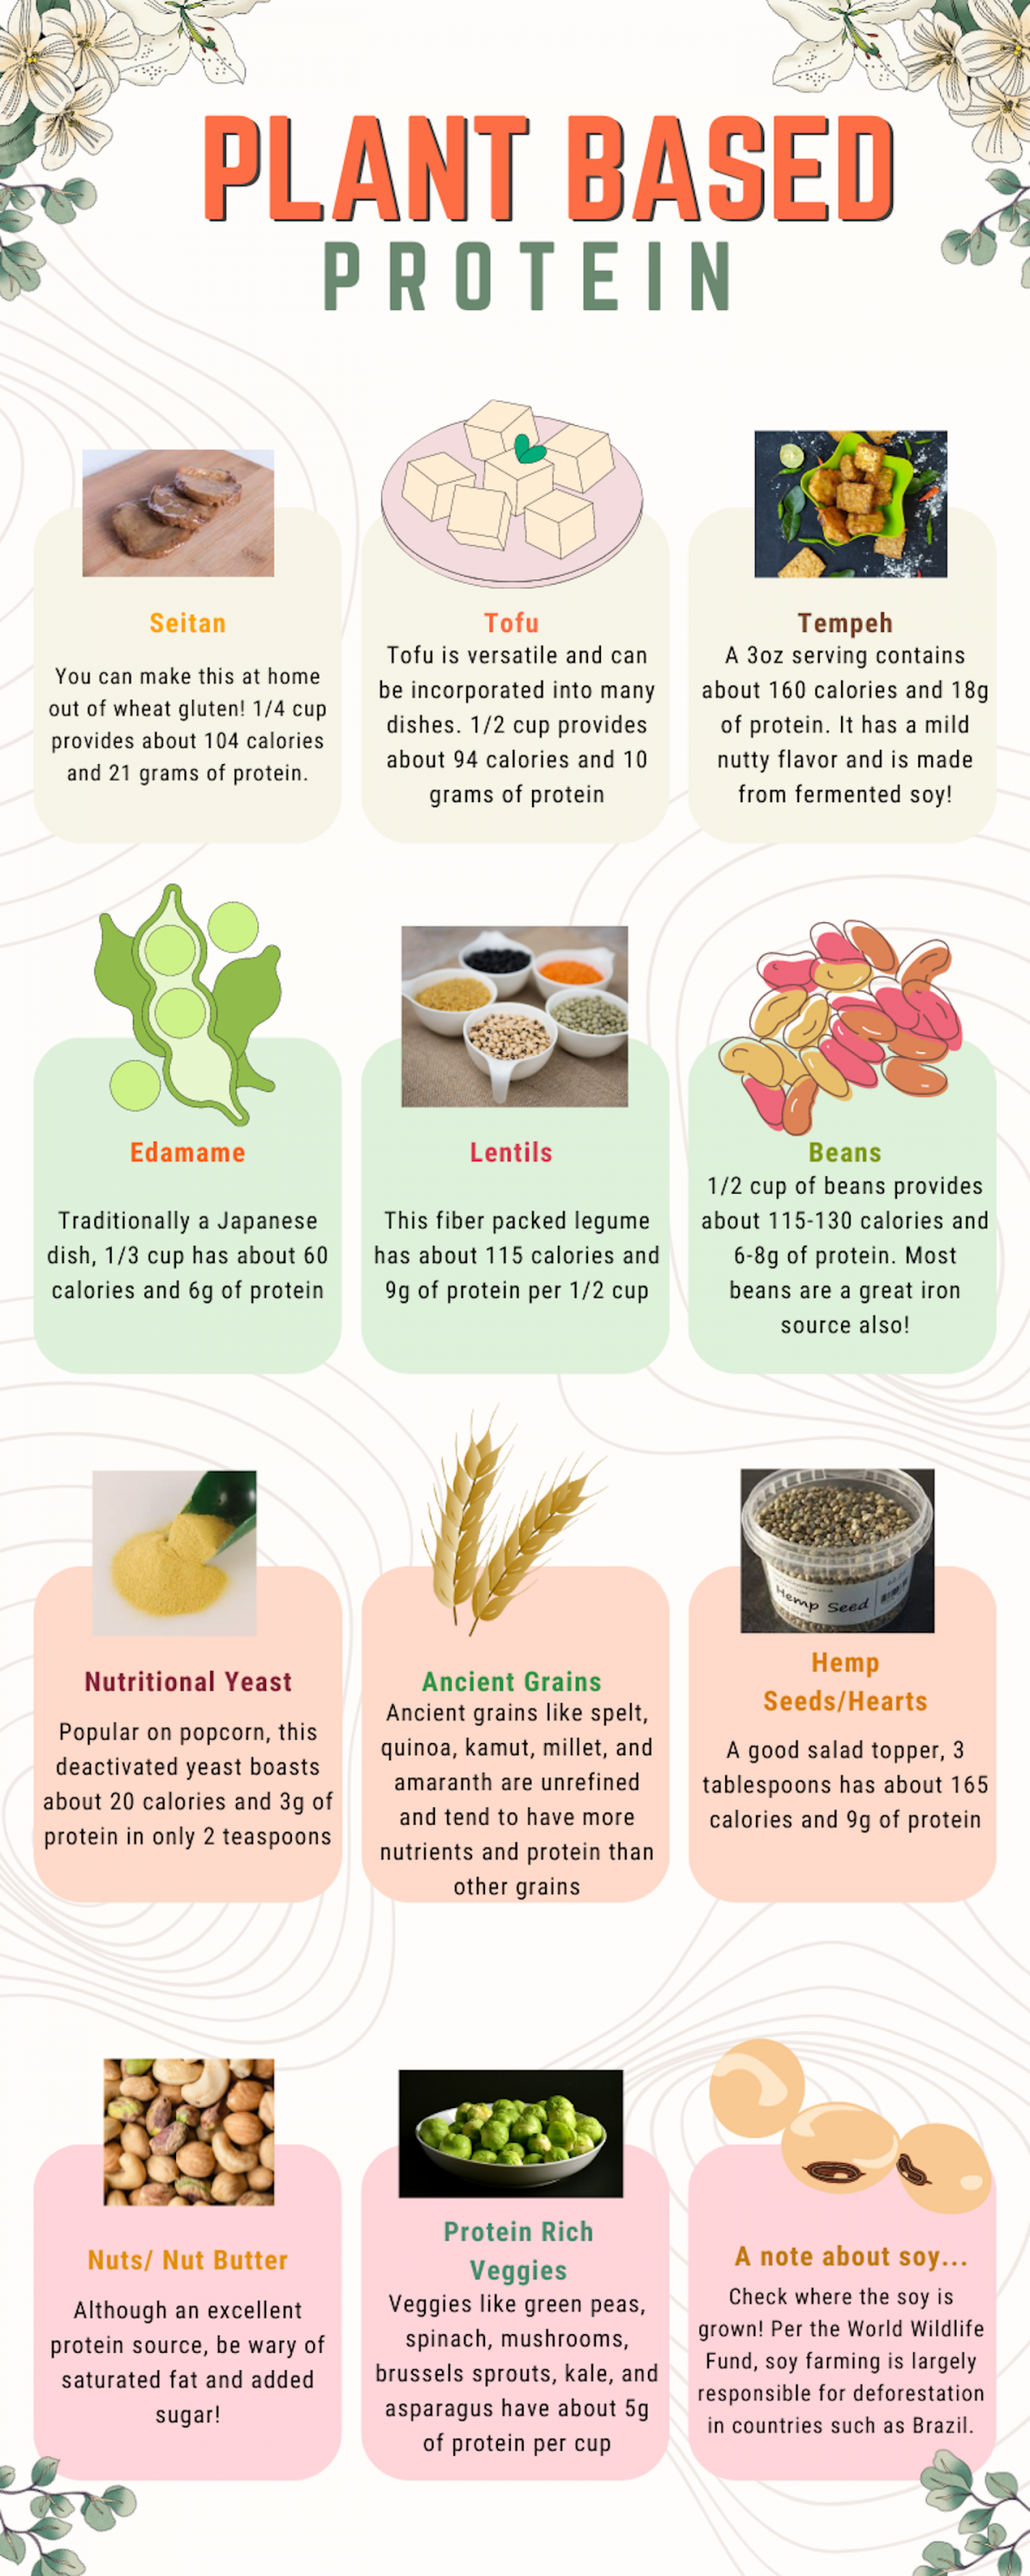 Tips for a Plant-Based Diet